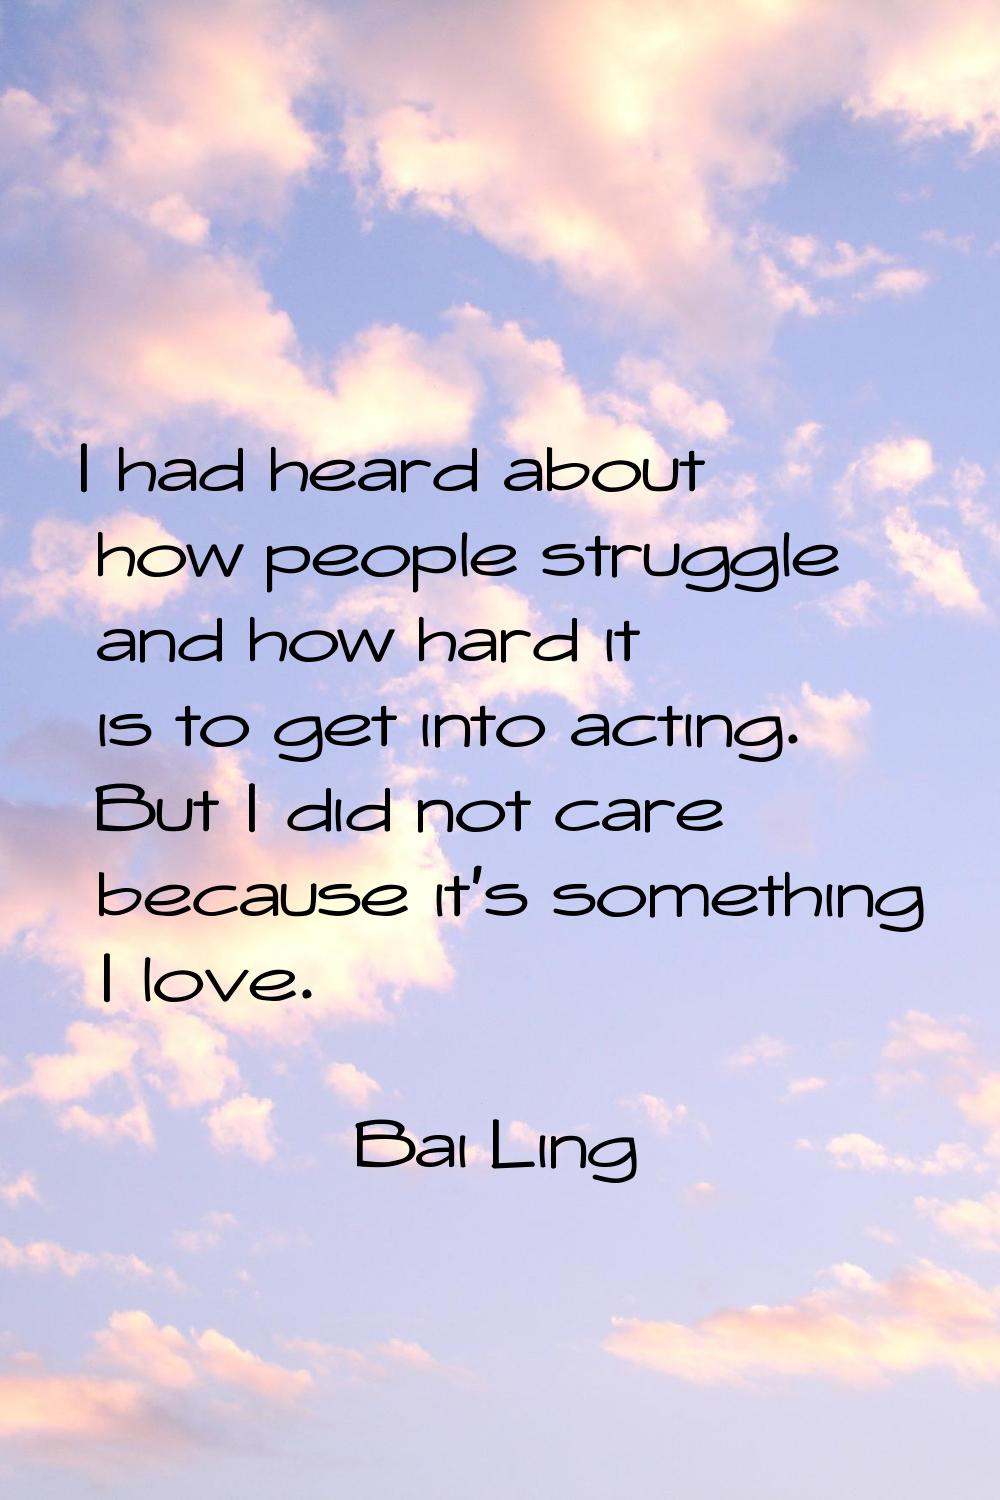 I had heard about how people struggle and how hard it is to get into acting. But I did not care bec